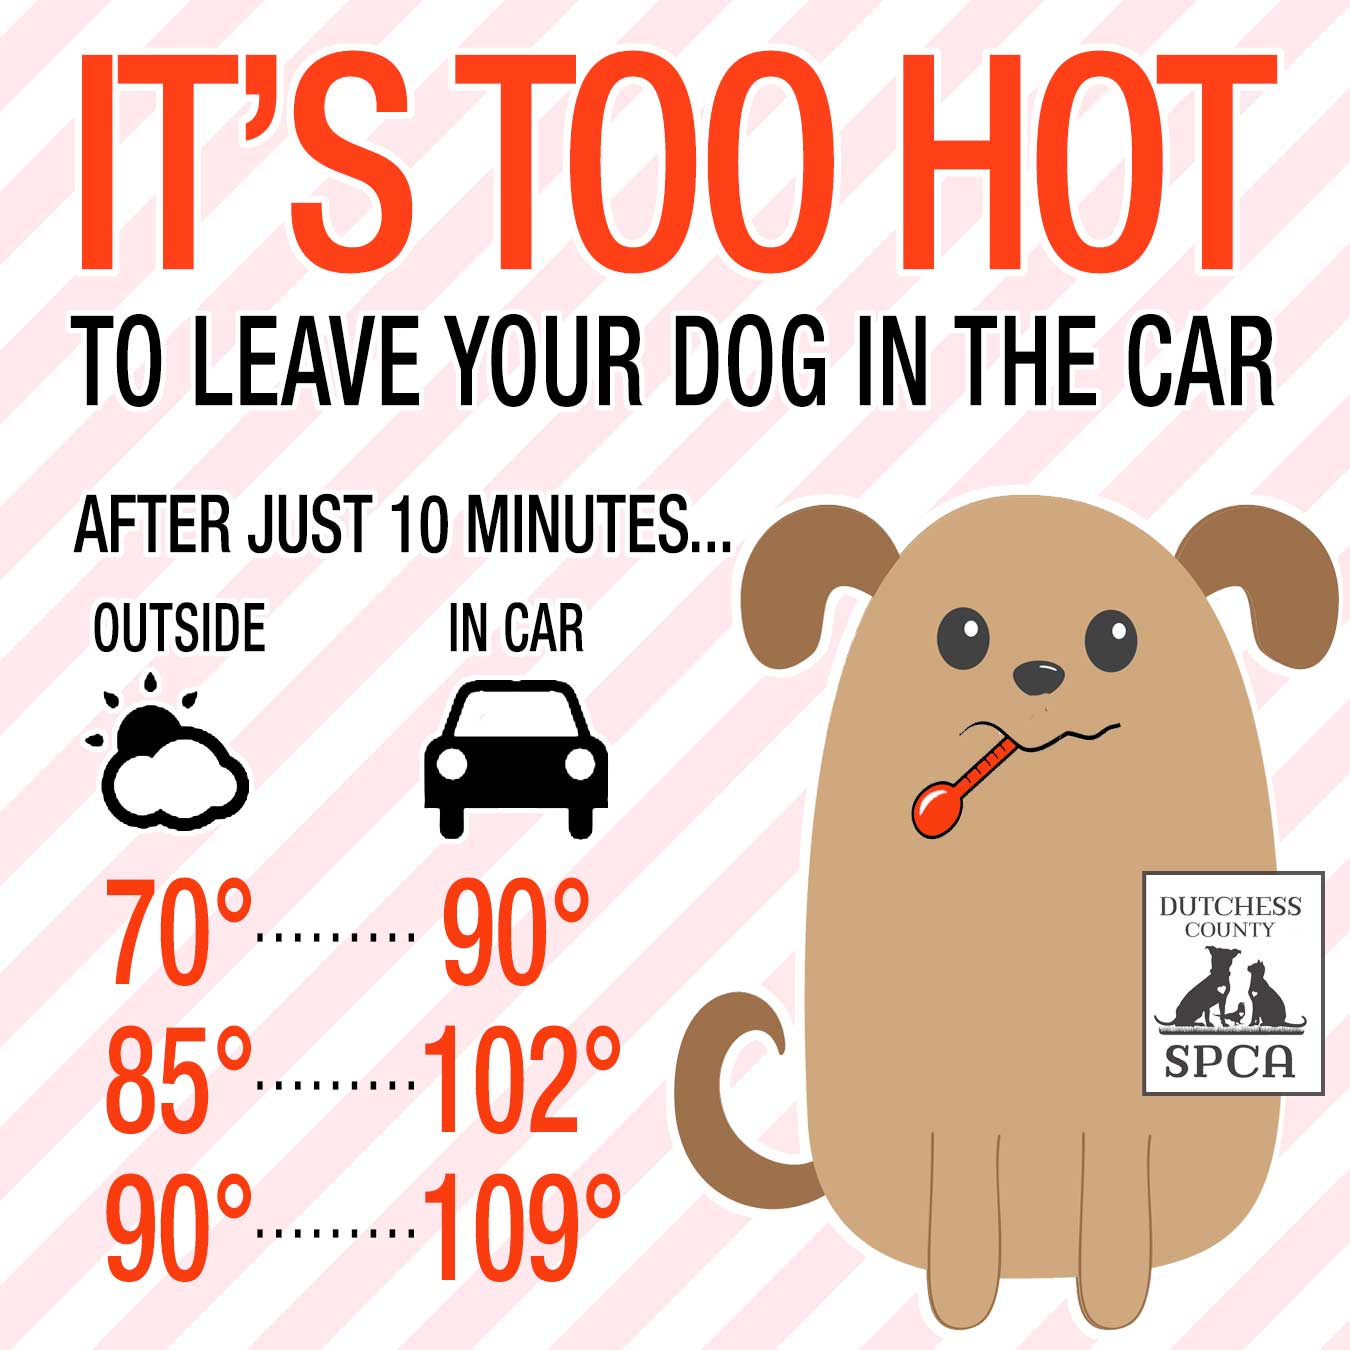 SPCA it's too hot to leave your dog in the car